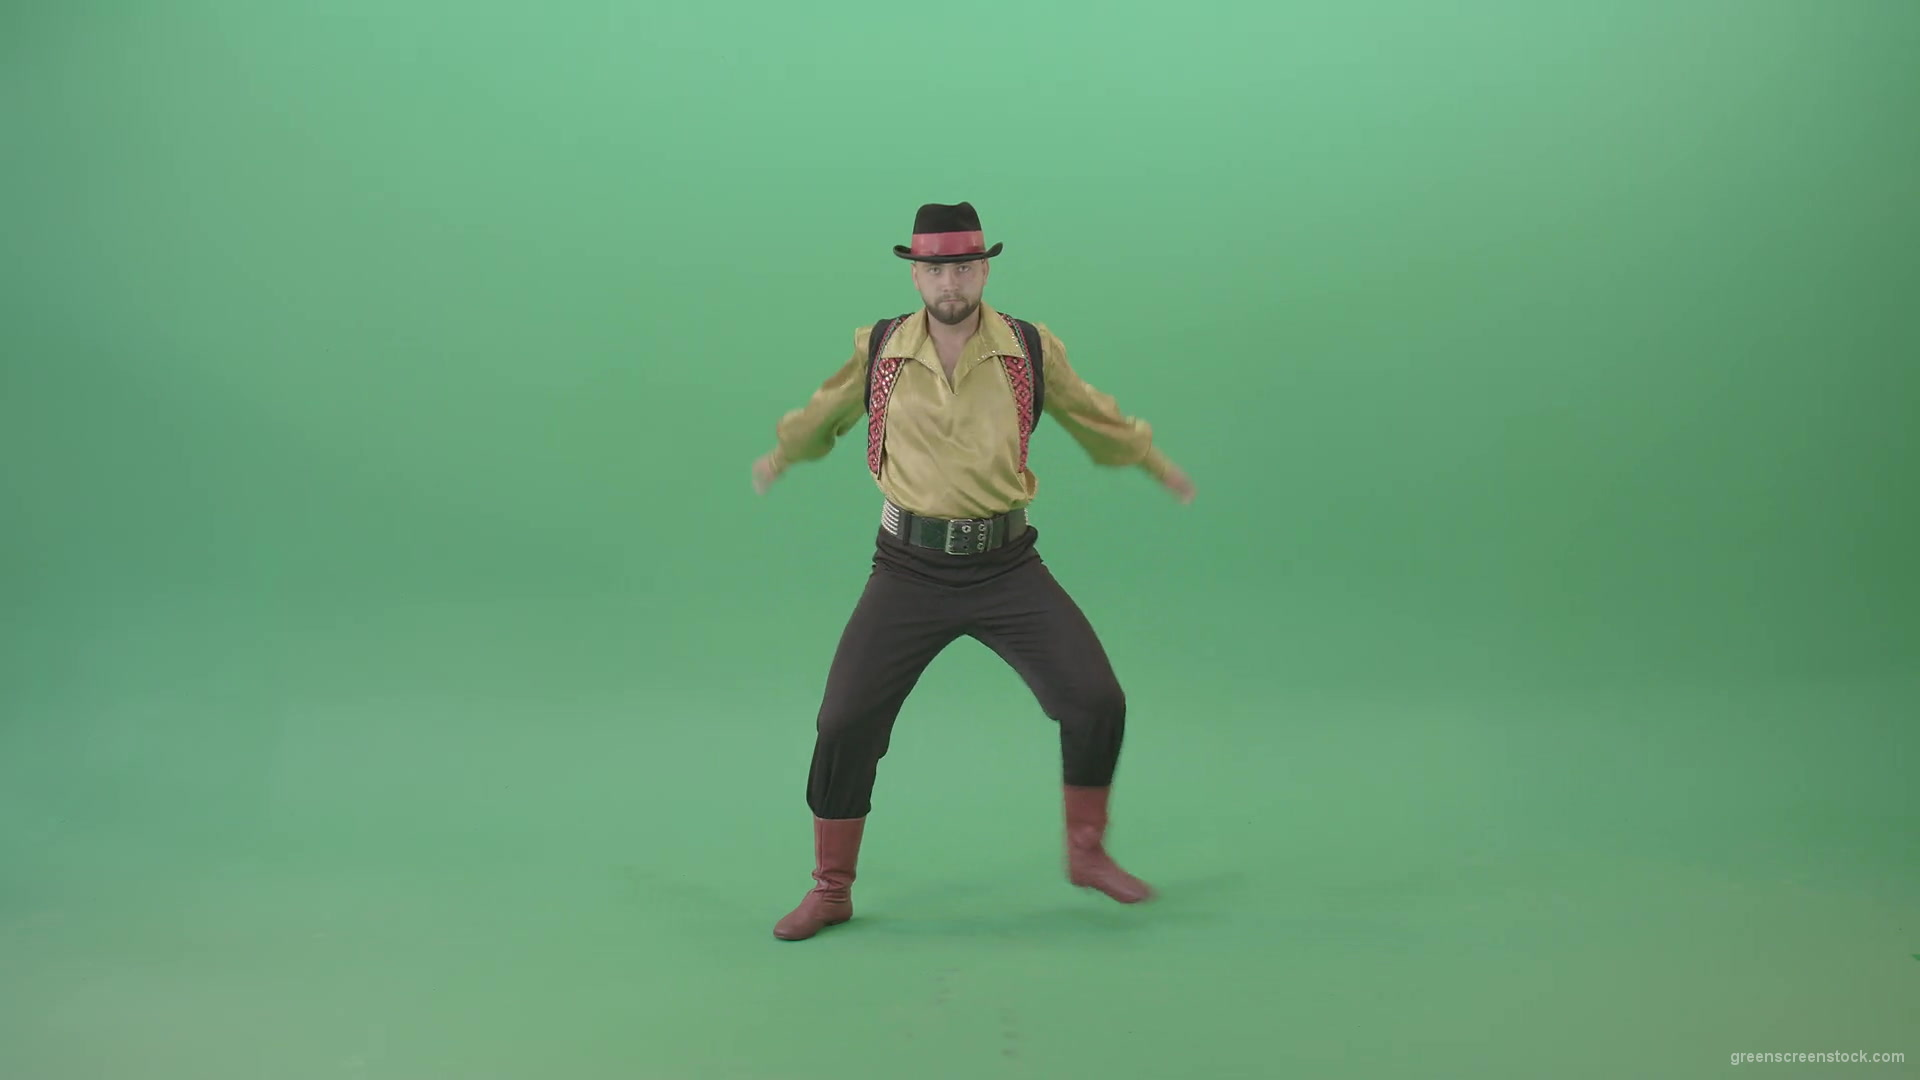 Moldova-man-dancing-with-clapping-isolated-on-Green-Screen-4K-Video-Footage-1920_002 Green Screen Stock